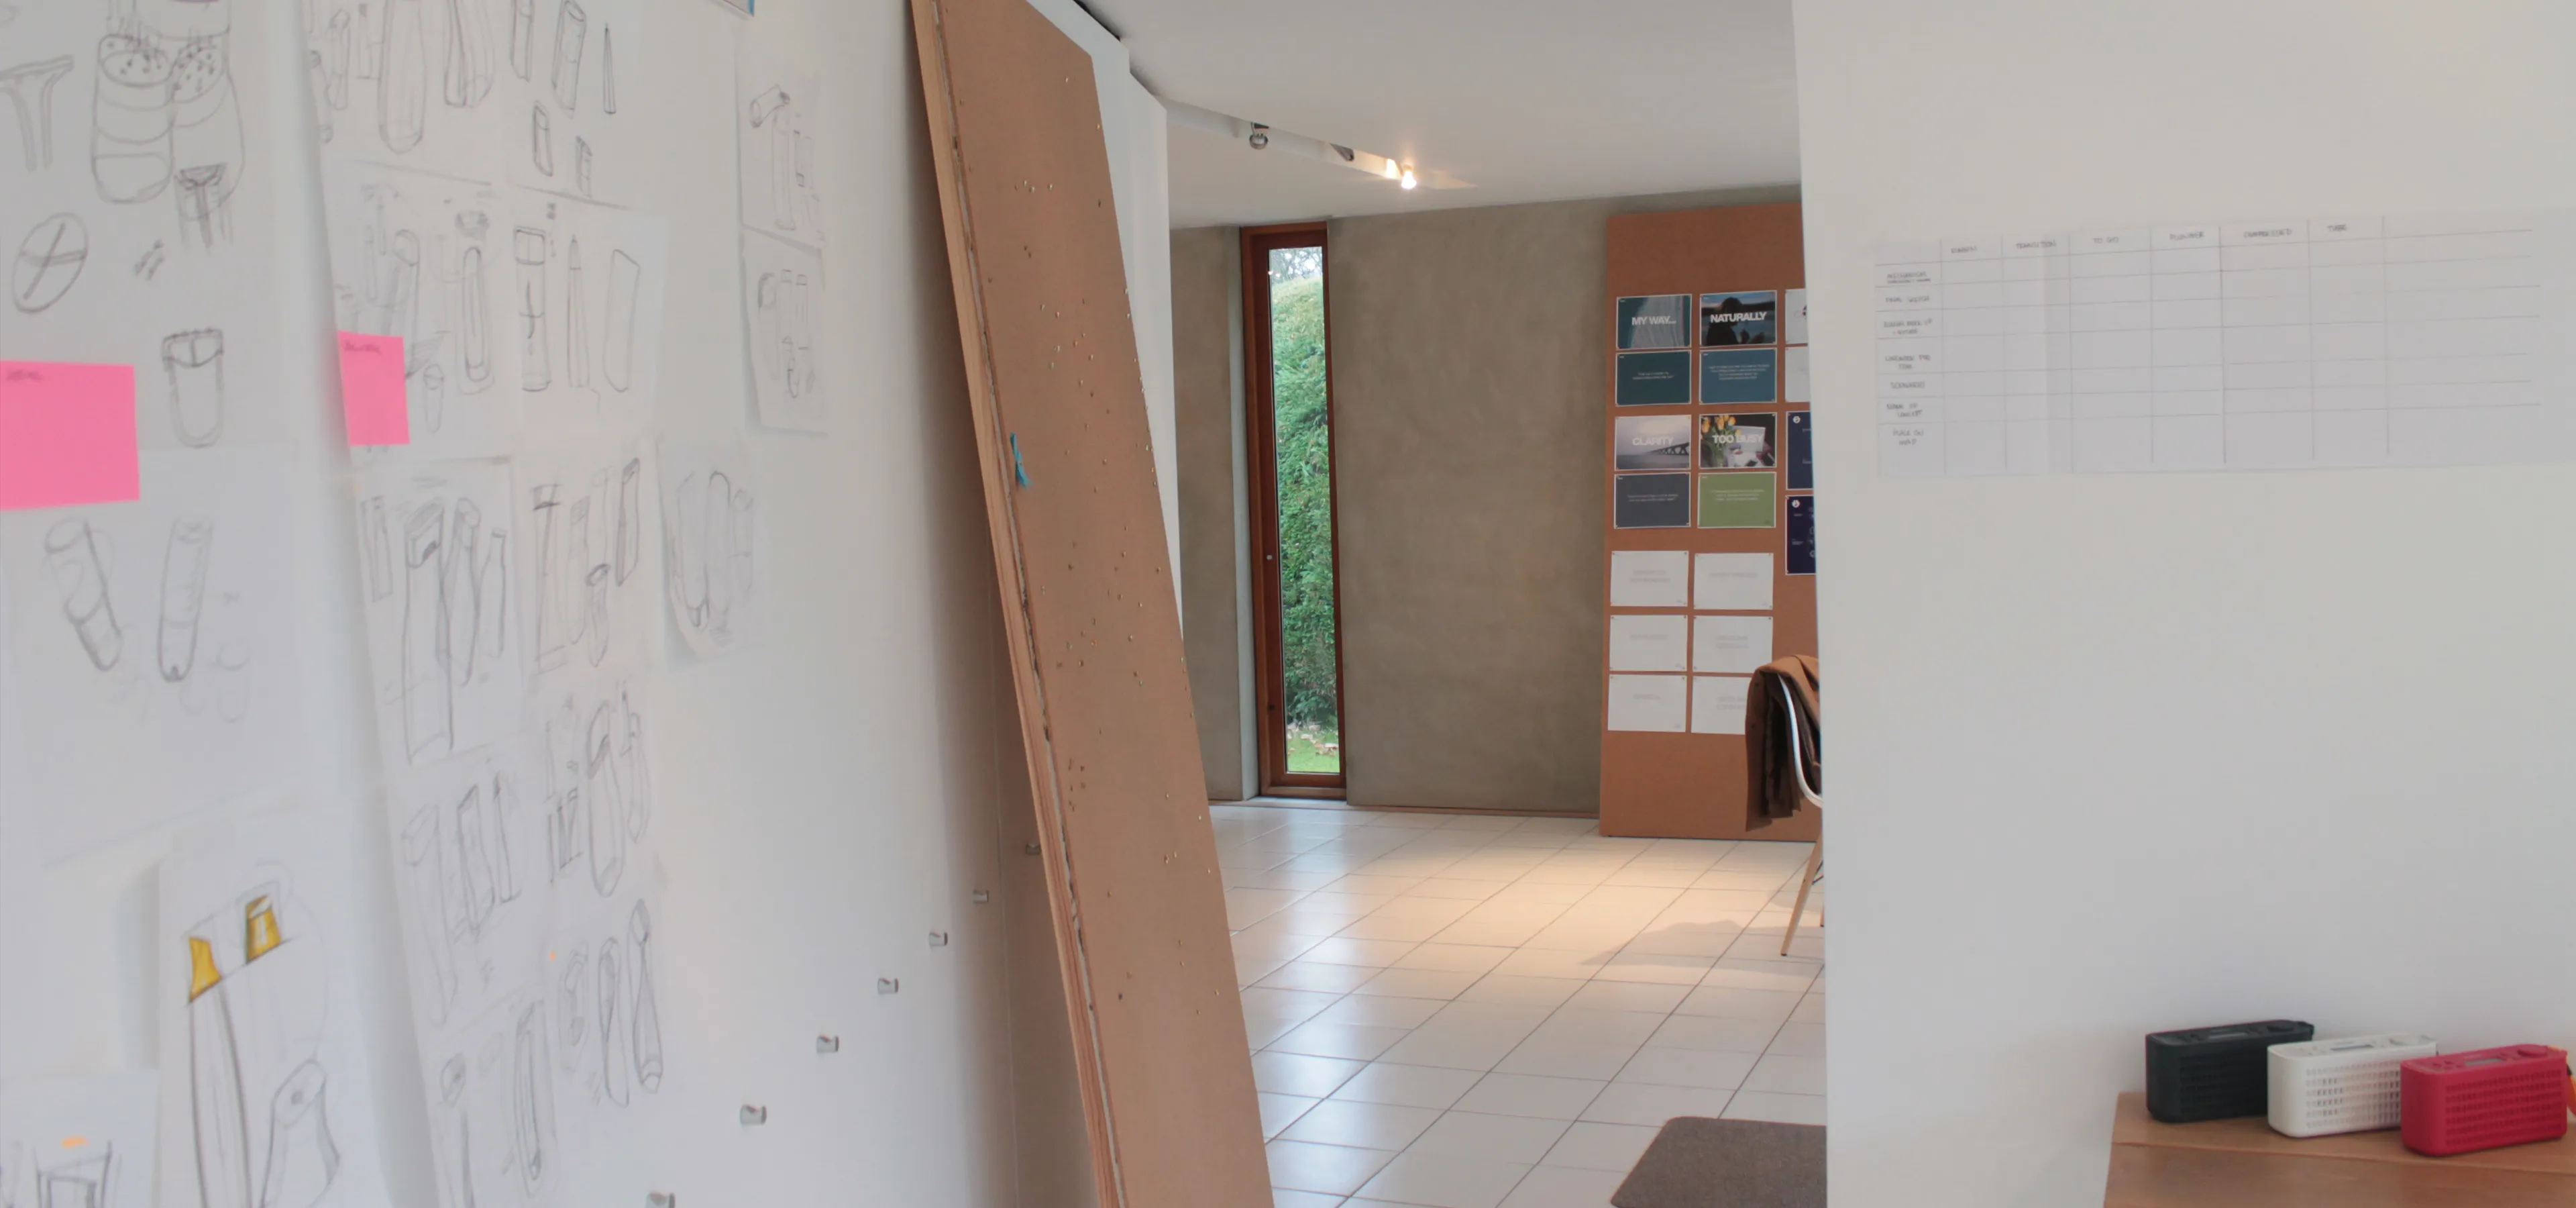 Pinboards and sketches on the wall in the Rodd studio